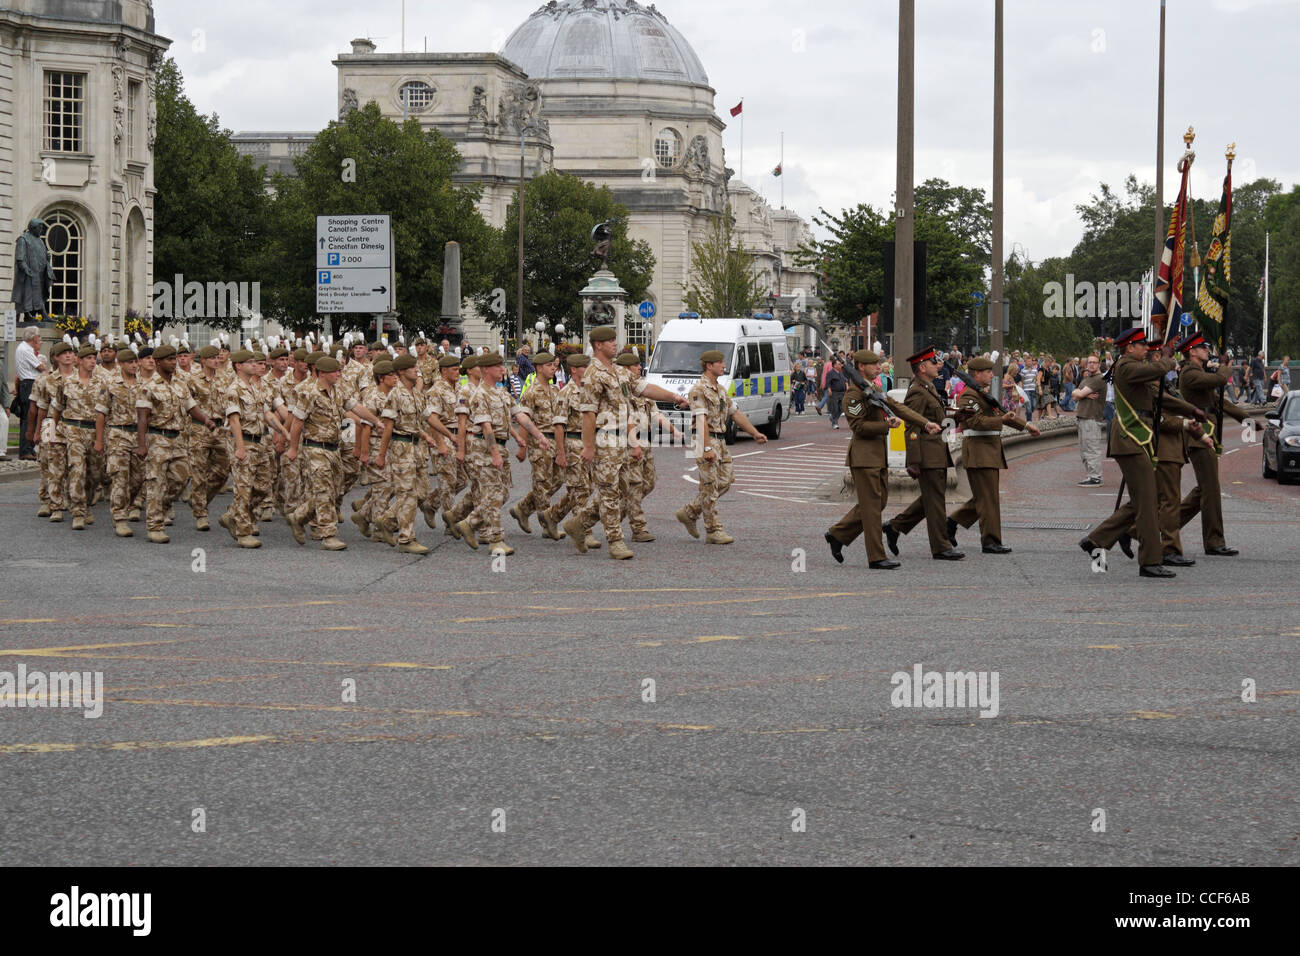 The Royal Welsh regiment parade through the streets of Cardiff Wales return from active duty in August 2009. British Army Military personel Stock Photo